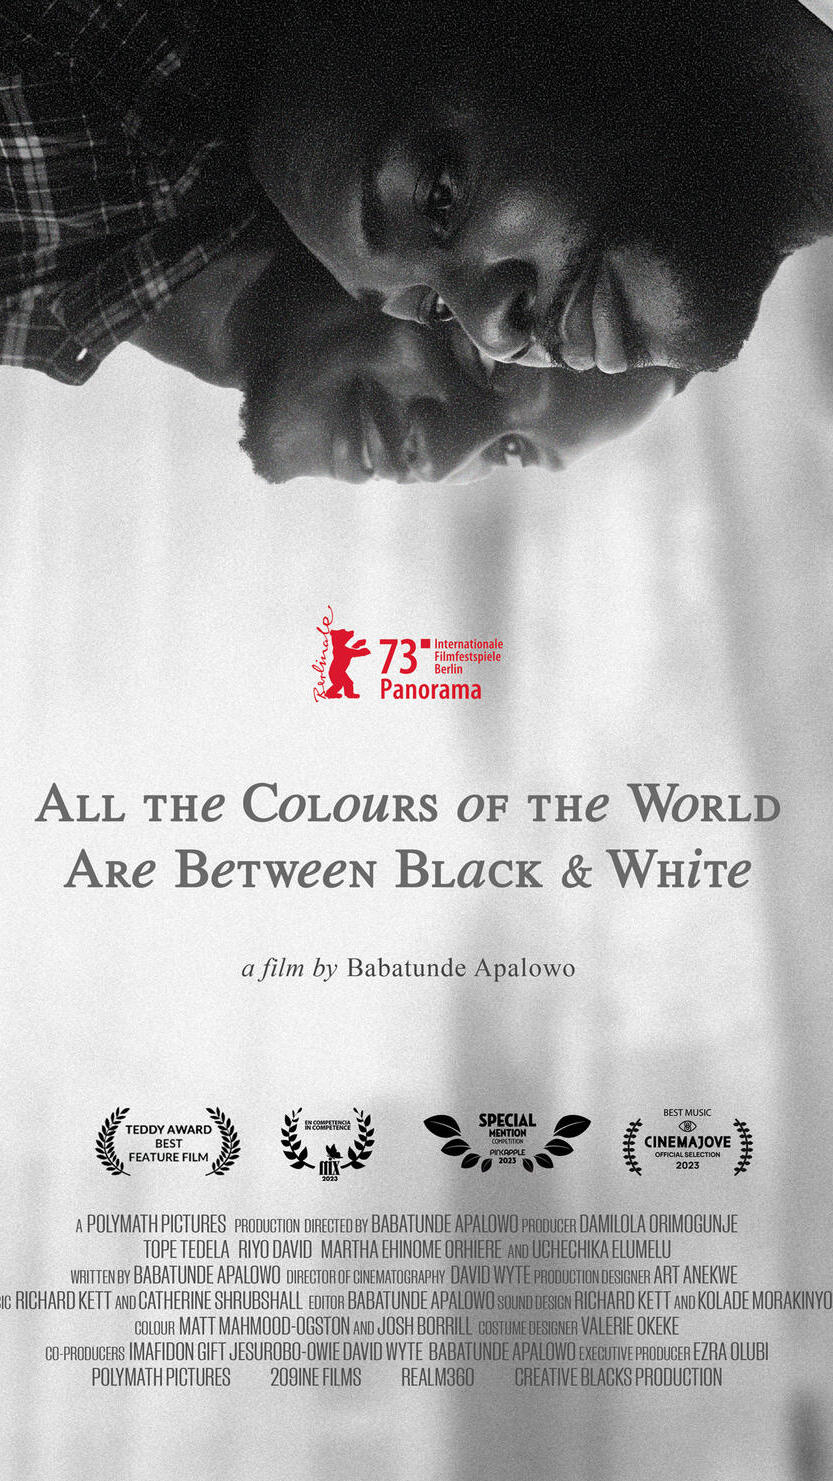 All the Colours of the World Are Between Black and White: Exploration of Taboos